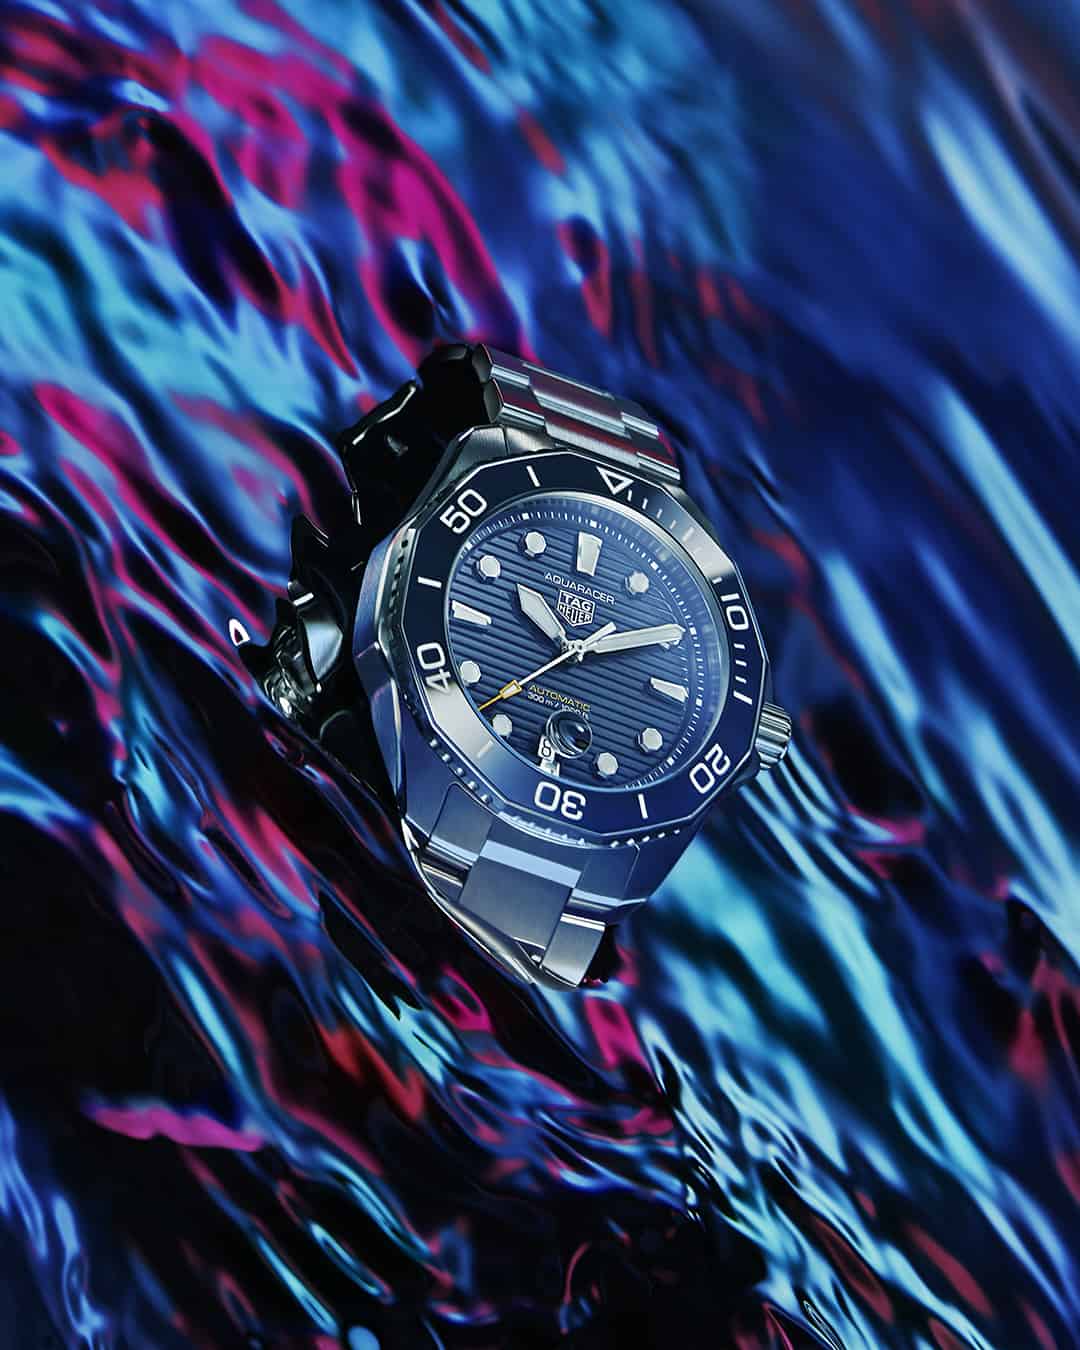 Introducing The New TAG Heuer Aquaracer